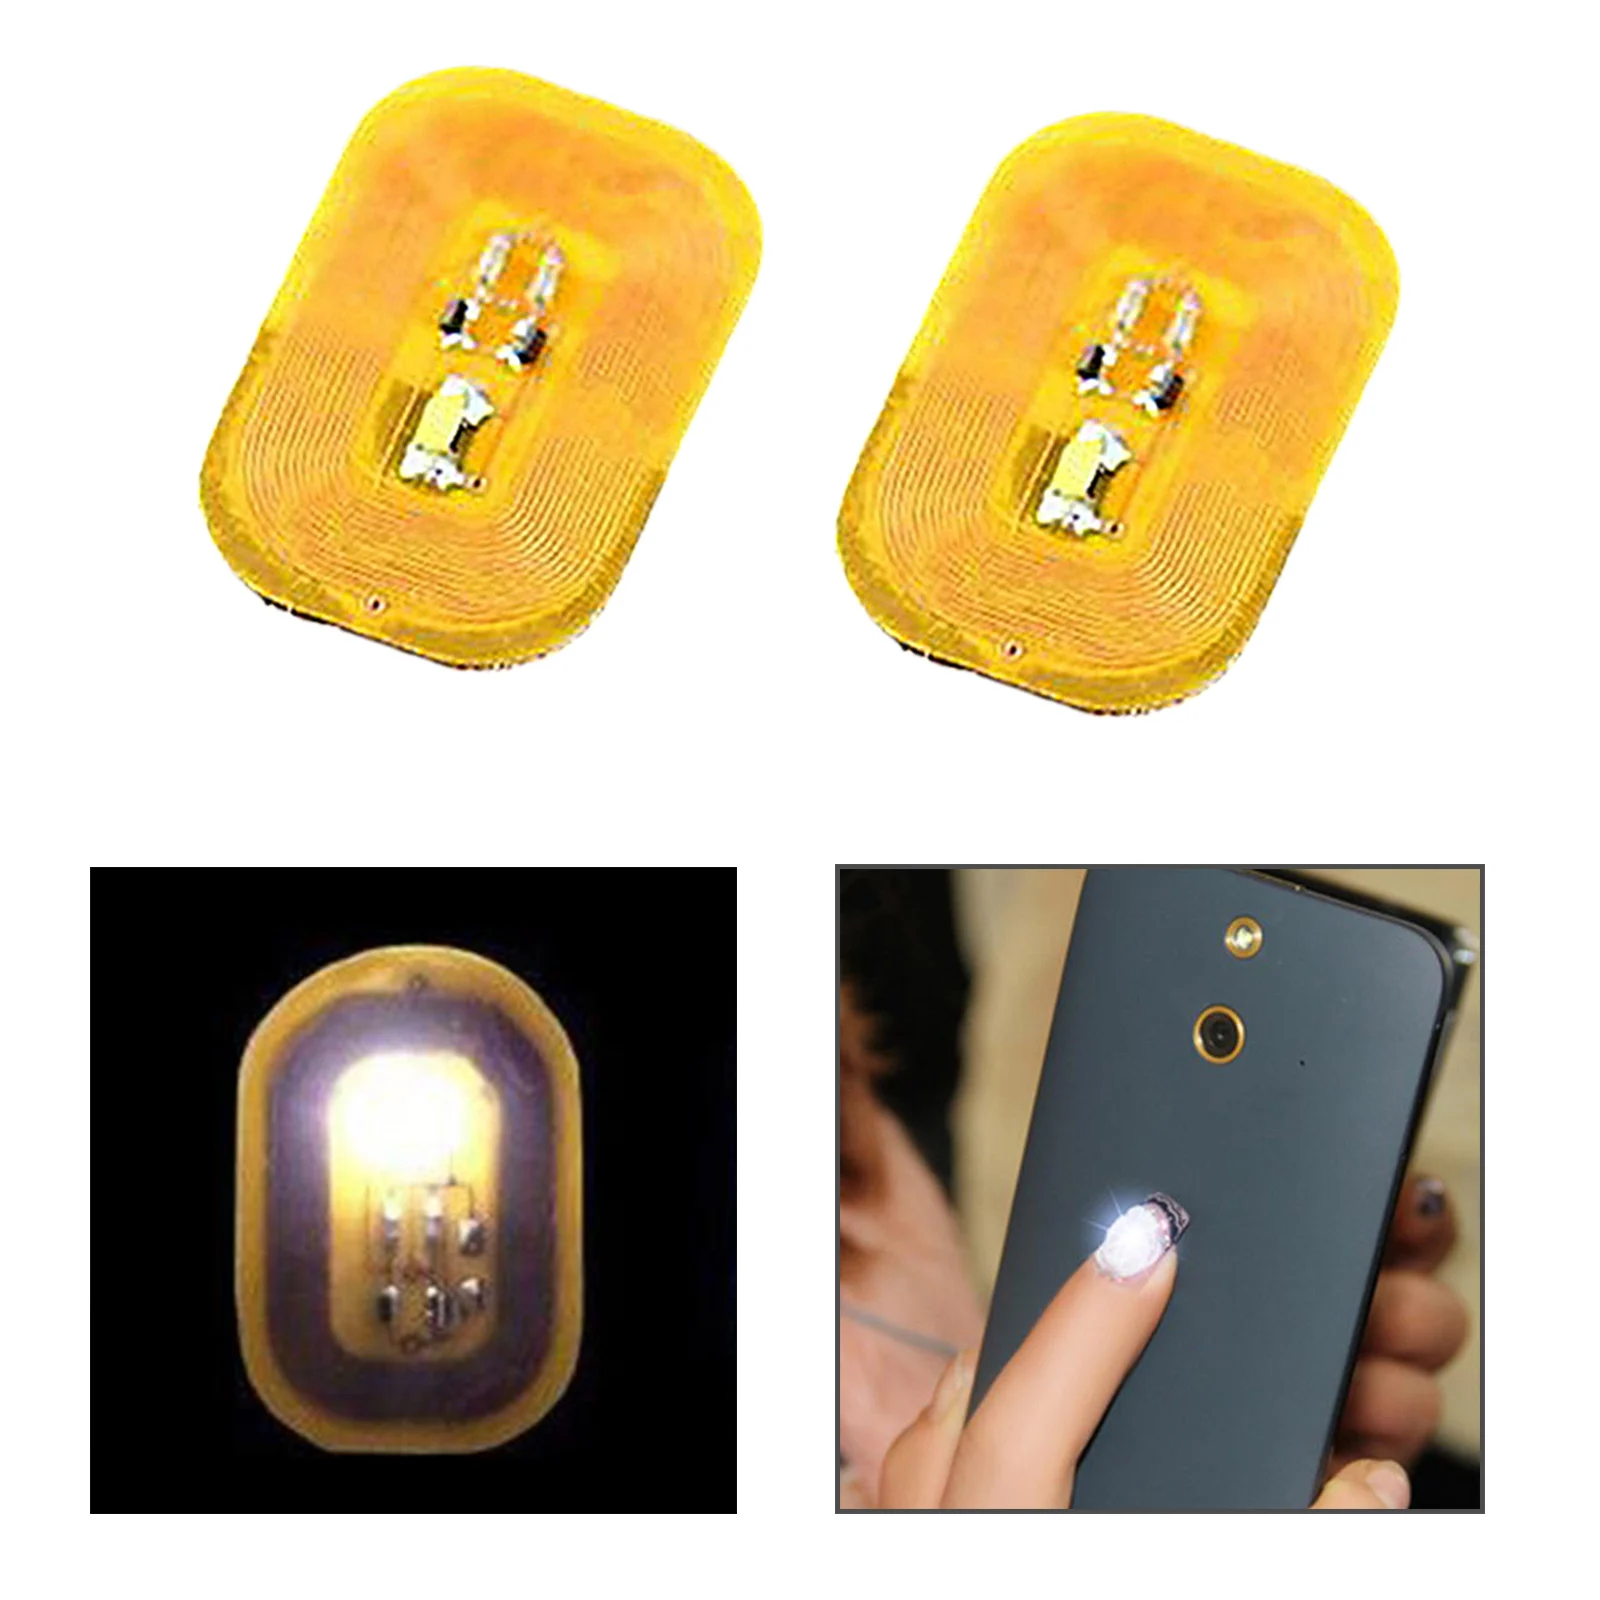 2 Pieces New Luck NFC Enabled Chip Nail Art Stickers, LED Tips Lamp Scintillation Flash Decal Decor Accessory Phones DIY